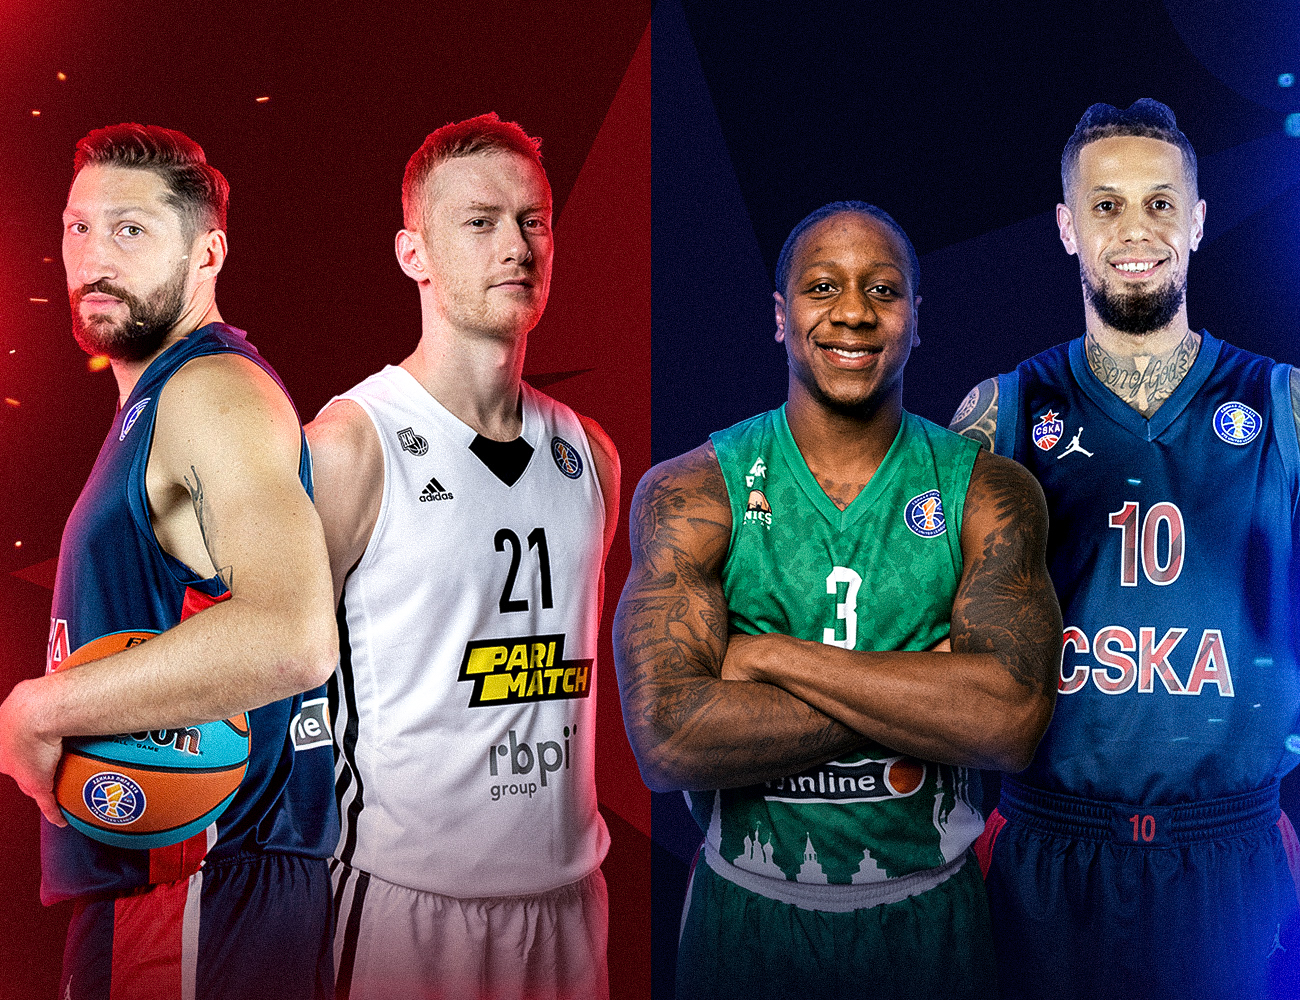 Nikita Kurbanov, Sergey Toropov, Isaiah Canaan and Daniel Hackett received the League’s wild cards for the All-Star Game